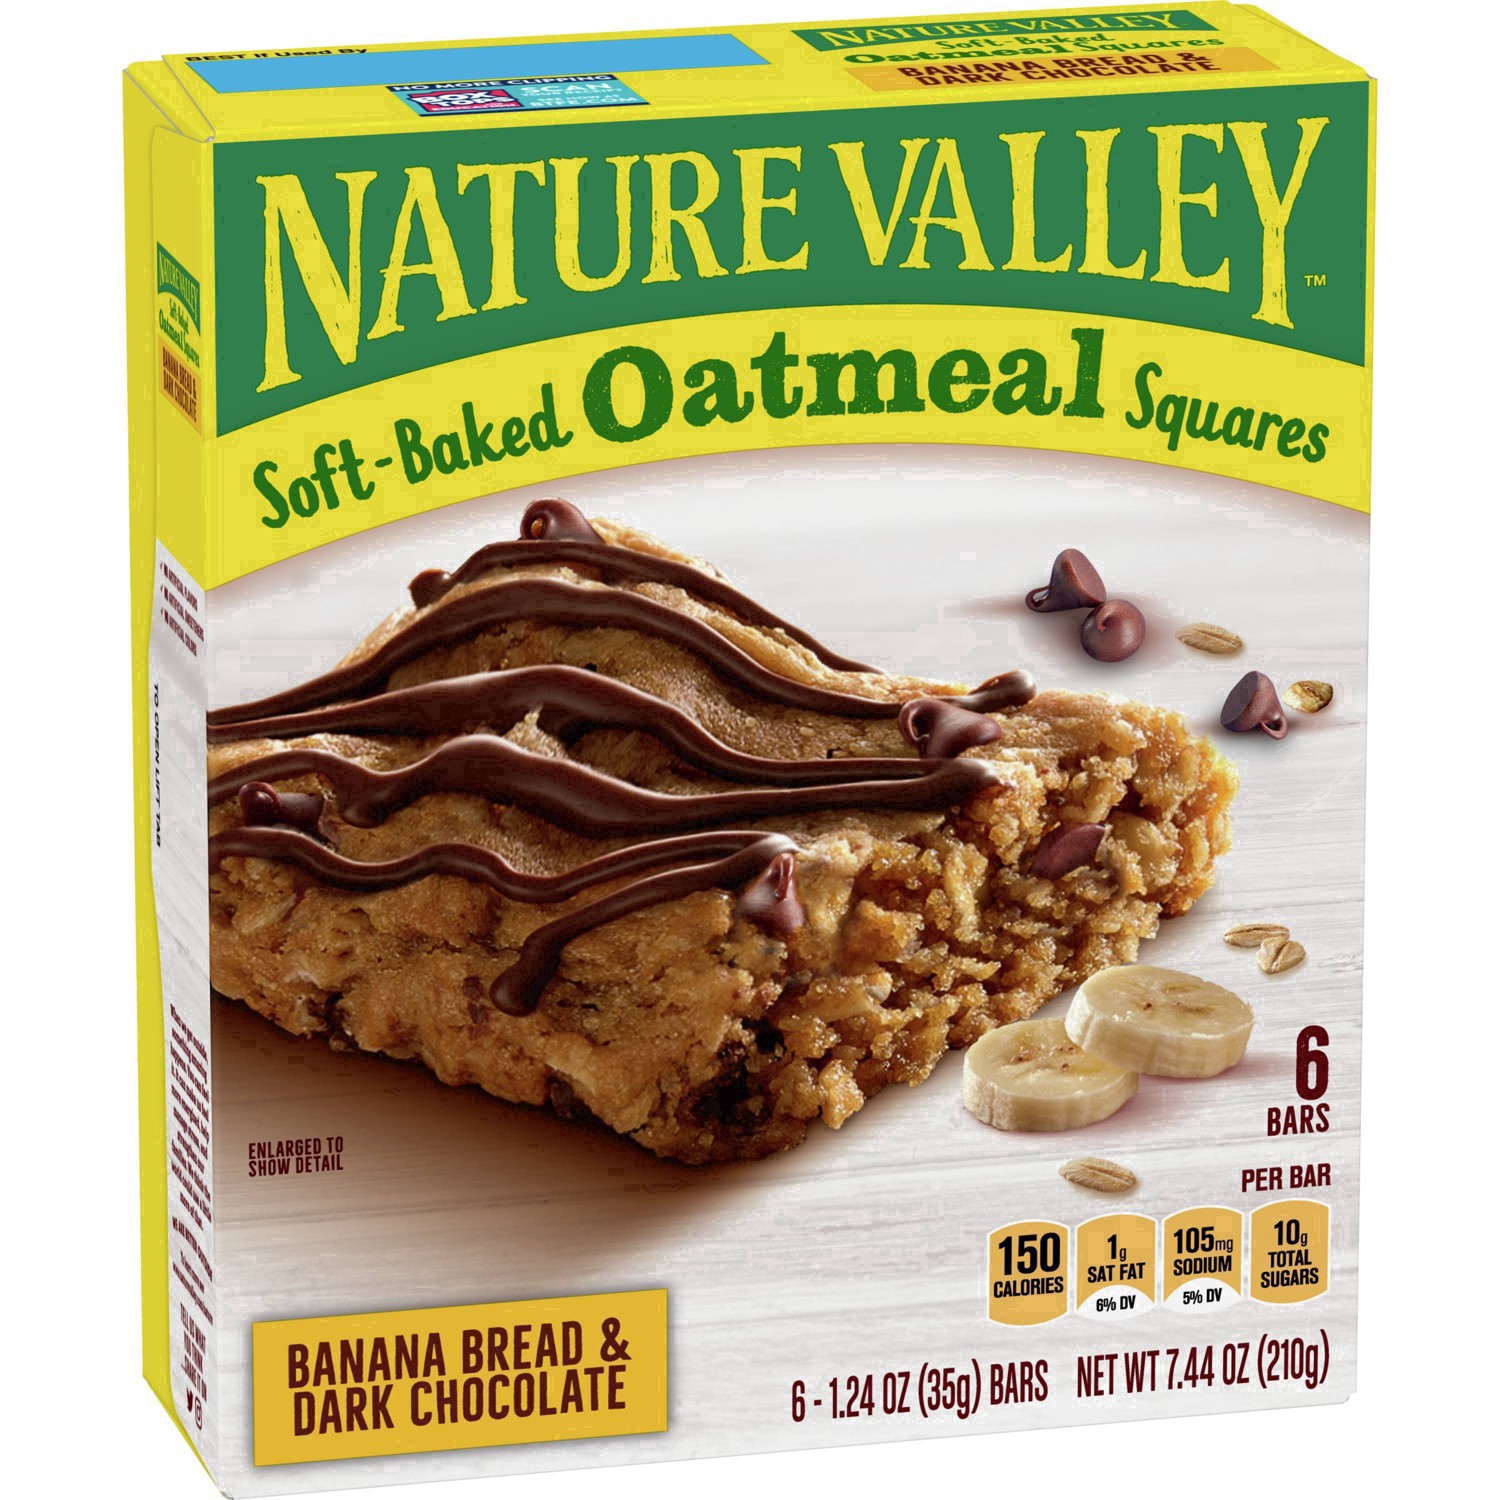 slide 35 of 101, Nature Valley Soft-Baked Oatmeal Squares, Banana Bread & Dark Chocolate, 6 ct, 6 ct